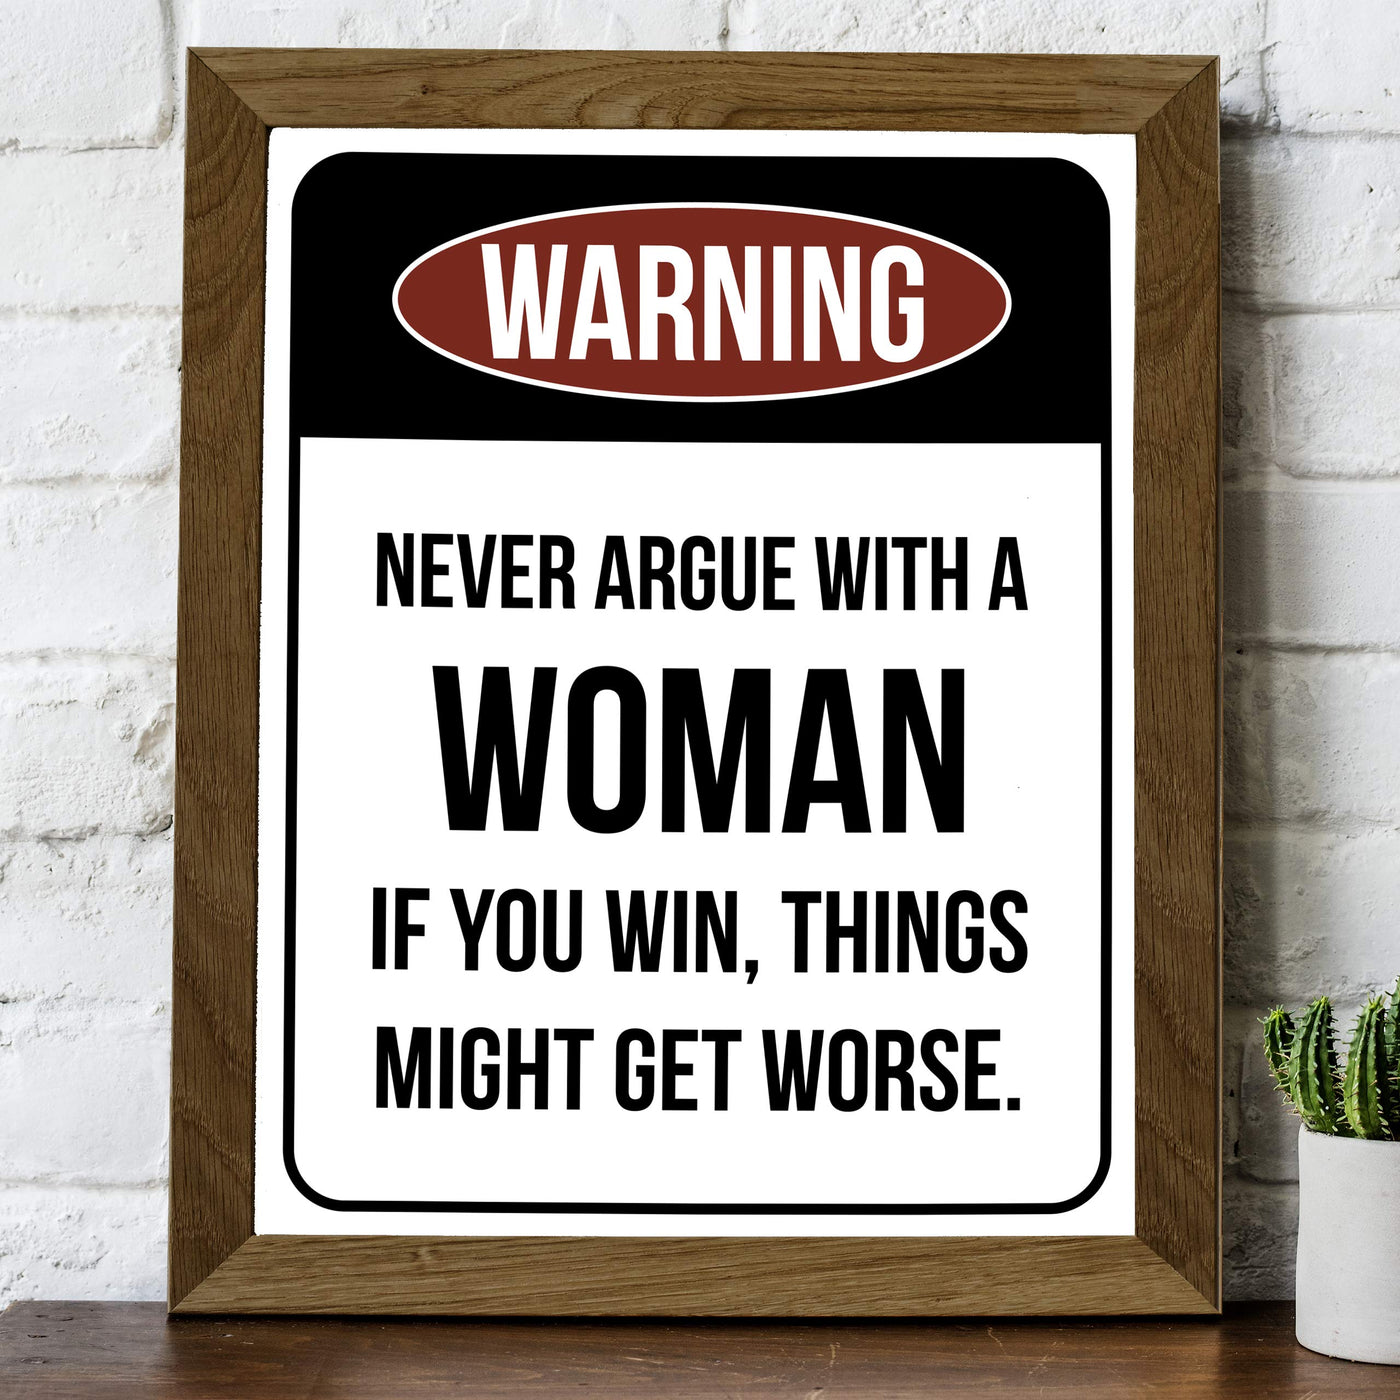 Never Argue With a Woman-If You Win Might Get Worse Funny Wall Sign -8 x 10" Sarcastic Art Print-Ready to Frame. Humorous Home-Office-Bar-Shop-Cave Decor. Fun Novelty Gift! Printed on Photo Paper.